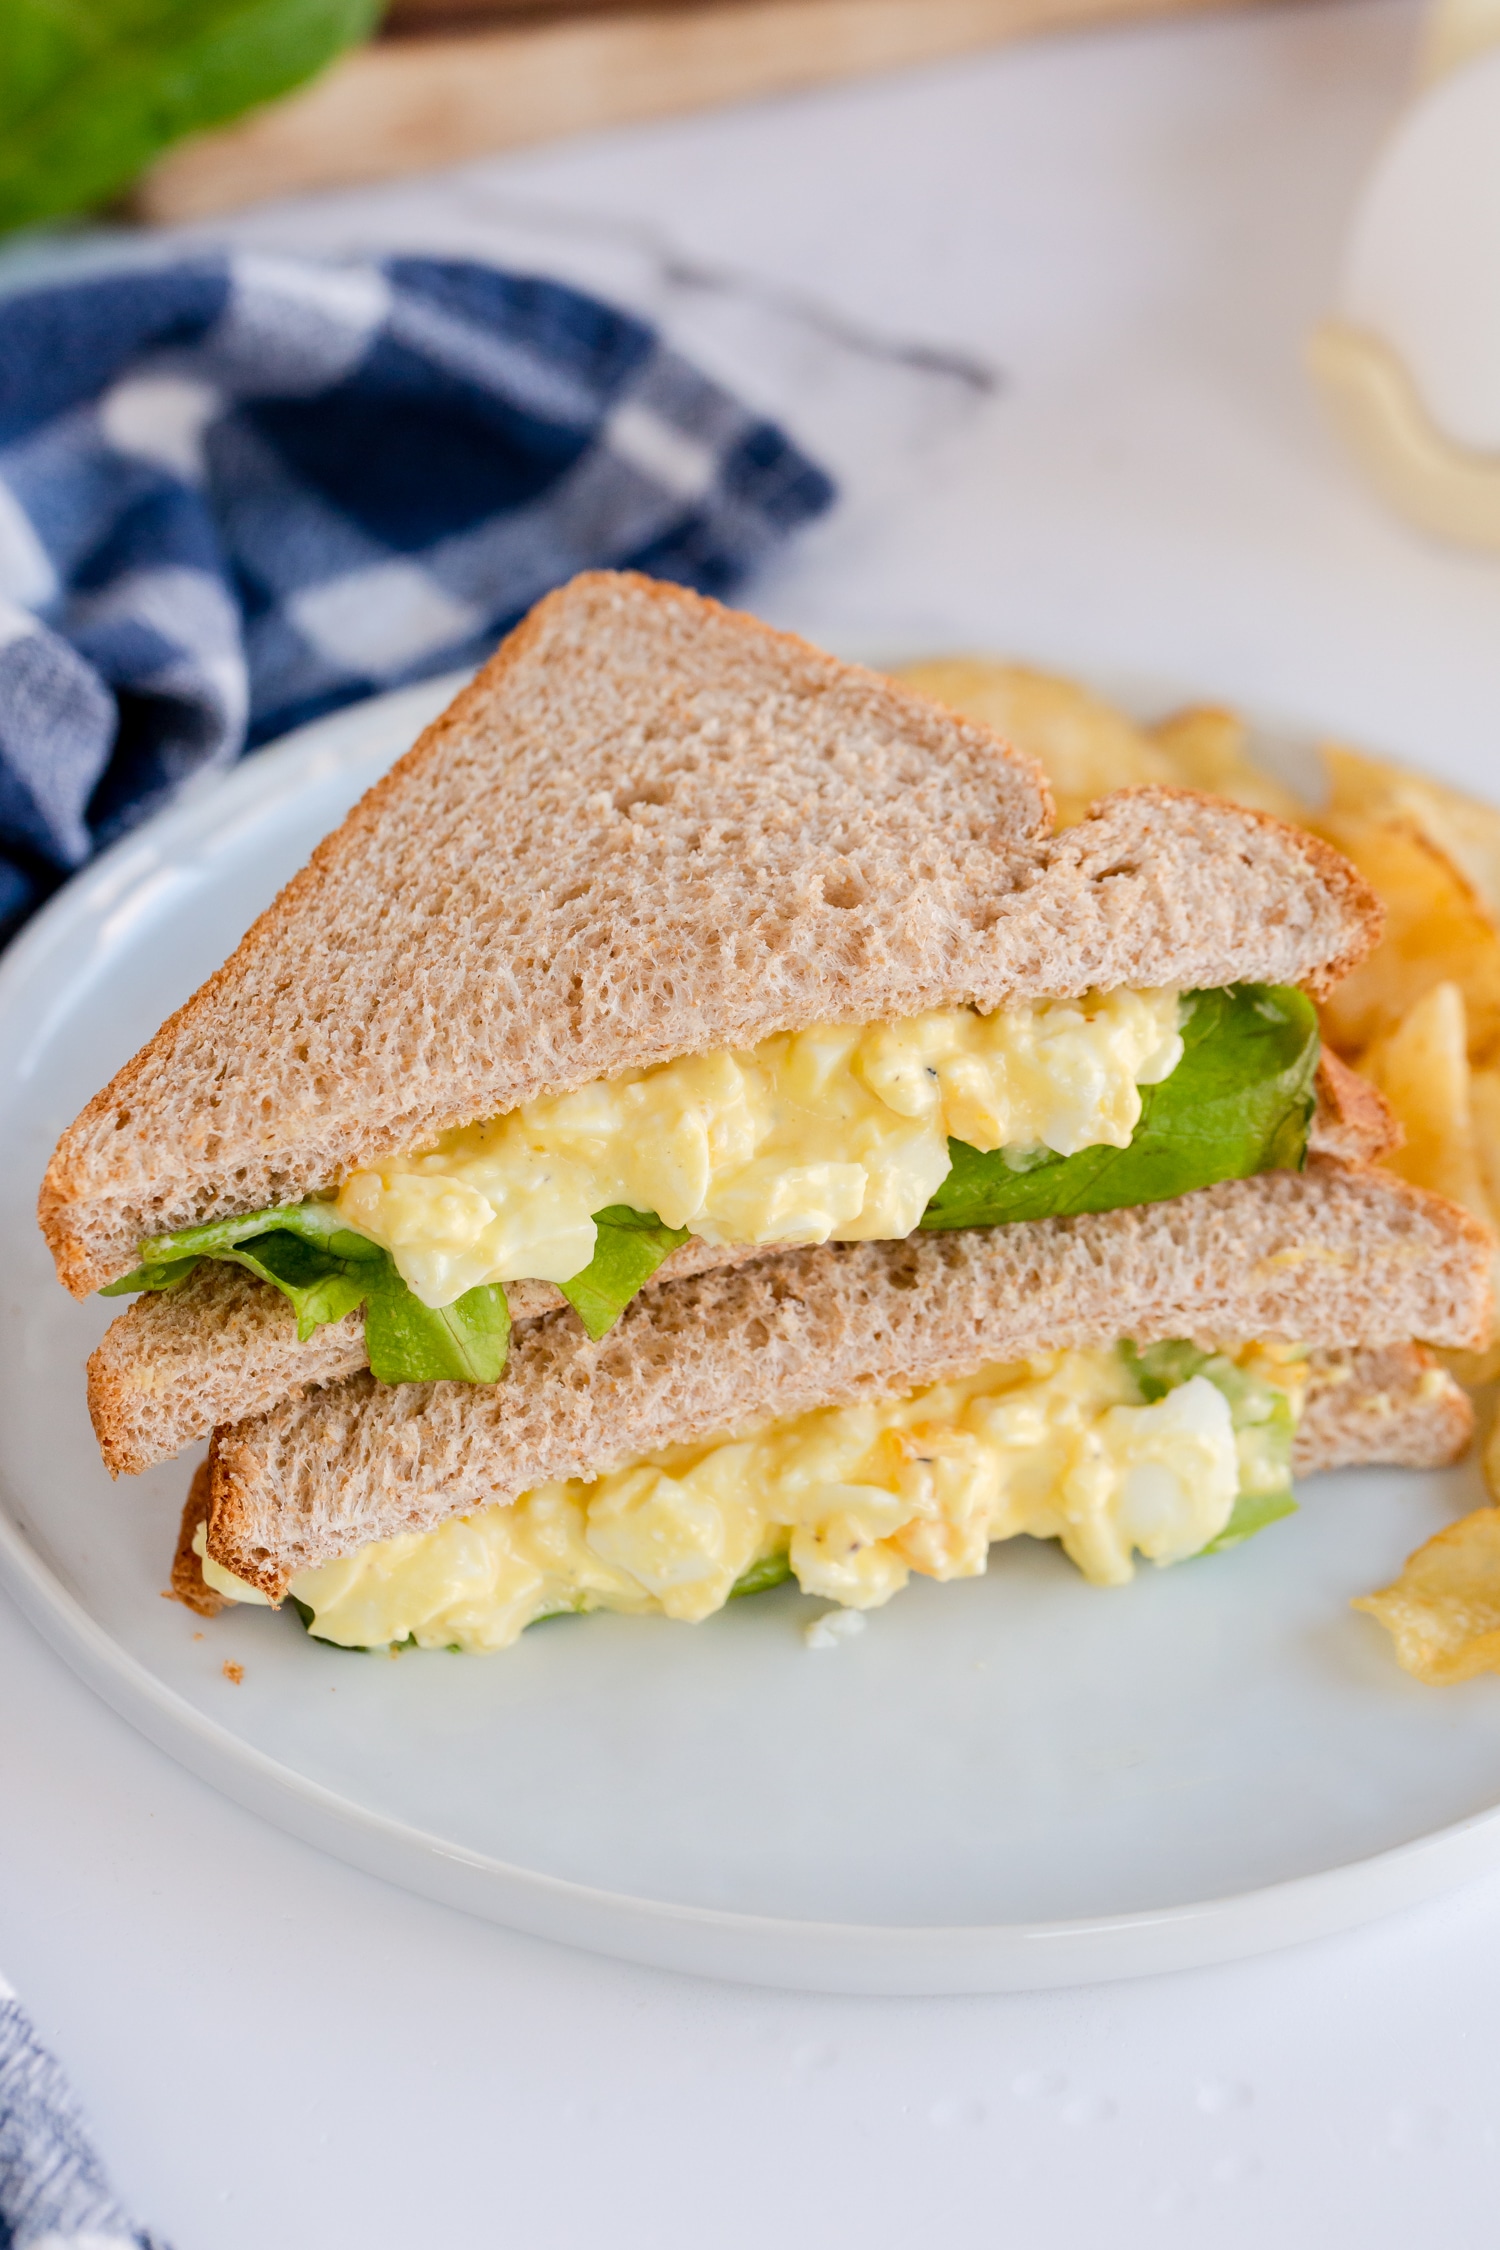 This Egg Salad Sandwich Recipe is an easy, delicious and easy to customize sandwich the family will enjoy!